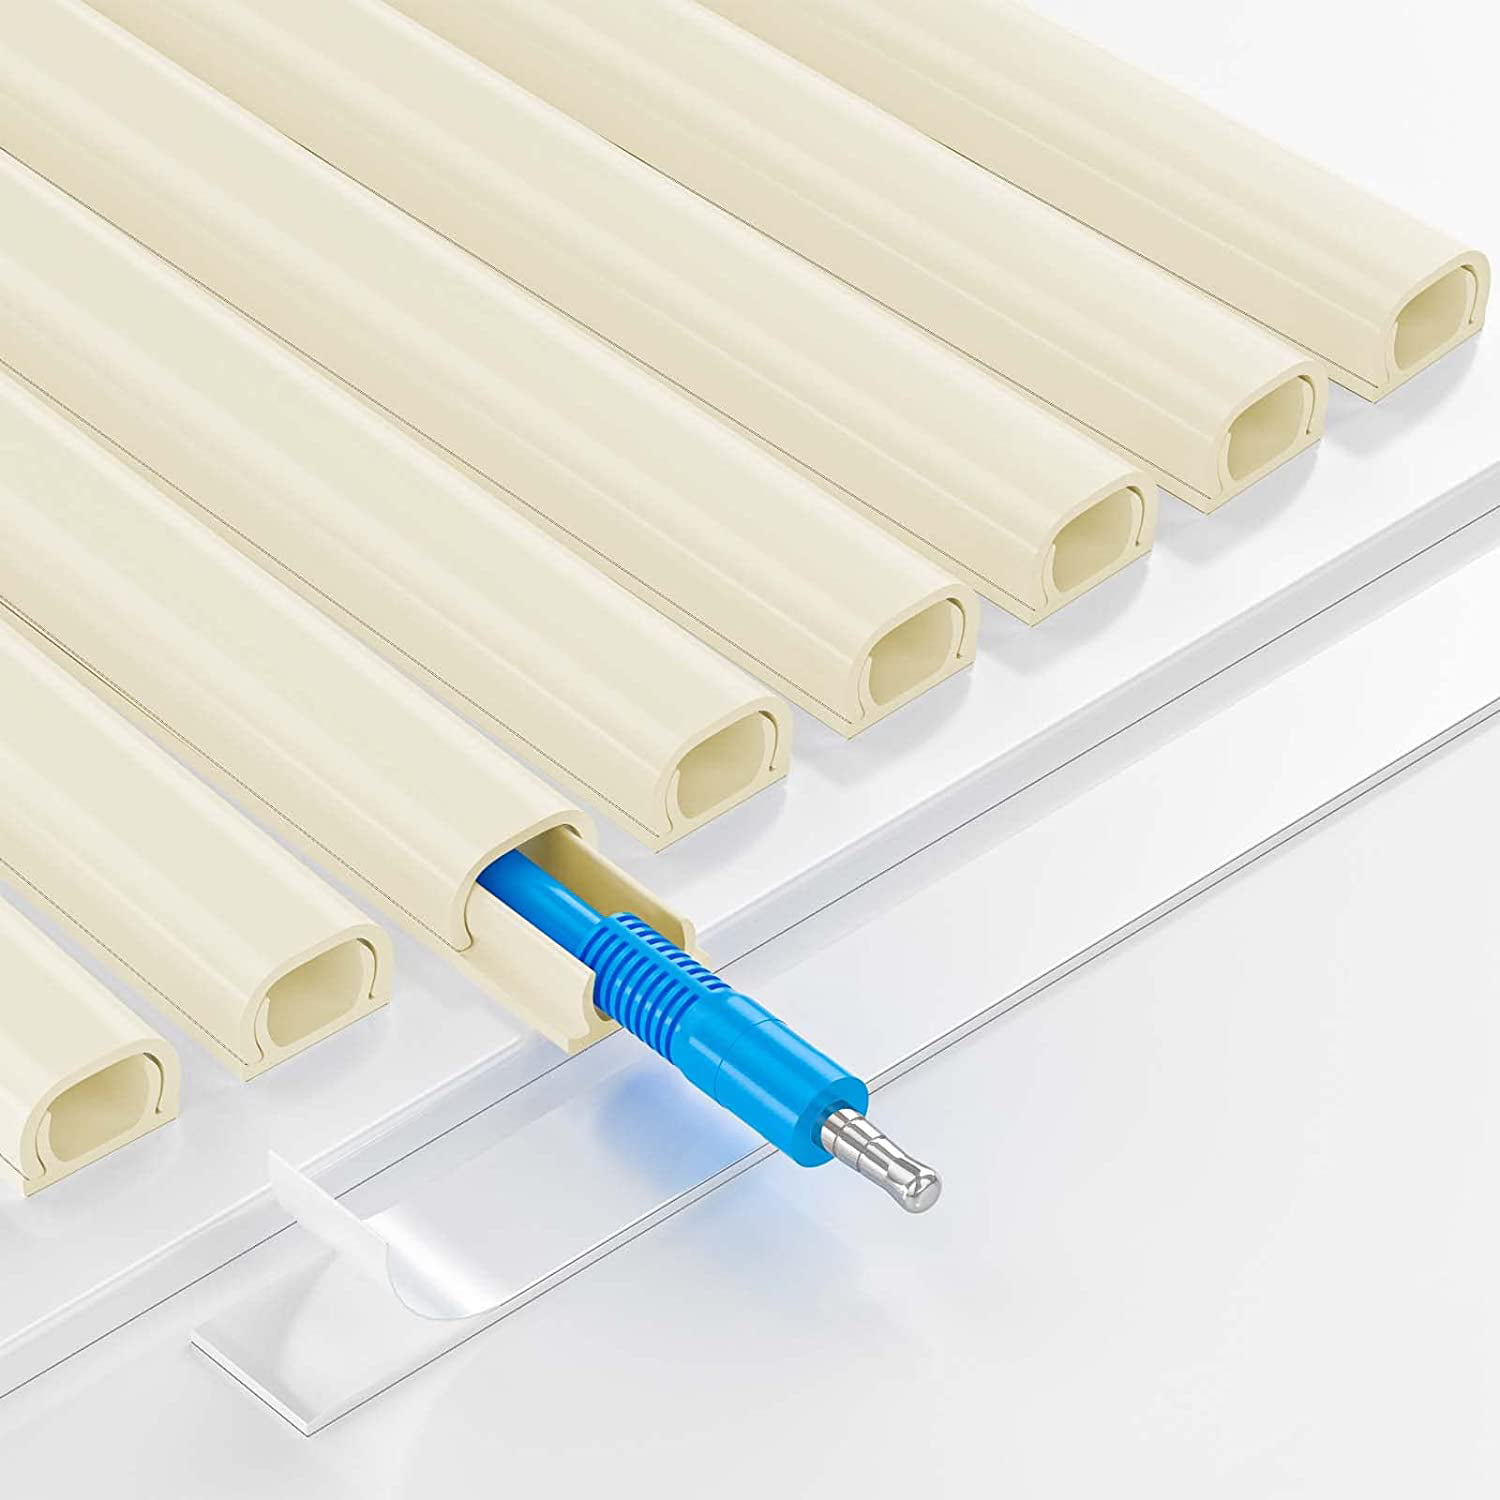 125in Cord Hider/Cover Wall - Yecaye One-Cord Channel Cable Concealer -  Easy Install Cable Management System for Max 2 Small Wires, Cable Raceway  Home Office, 8X L15.7in W0.59in H0.4in, White 